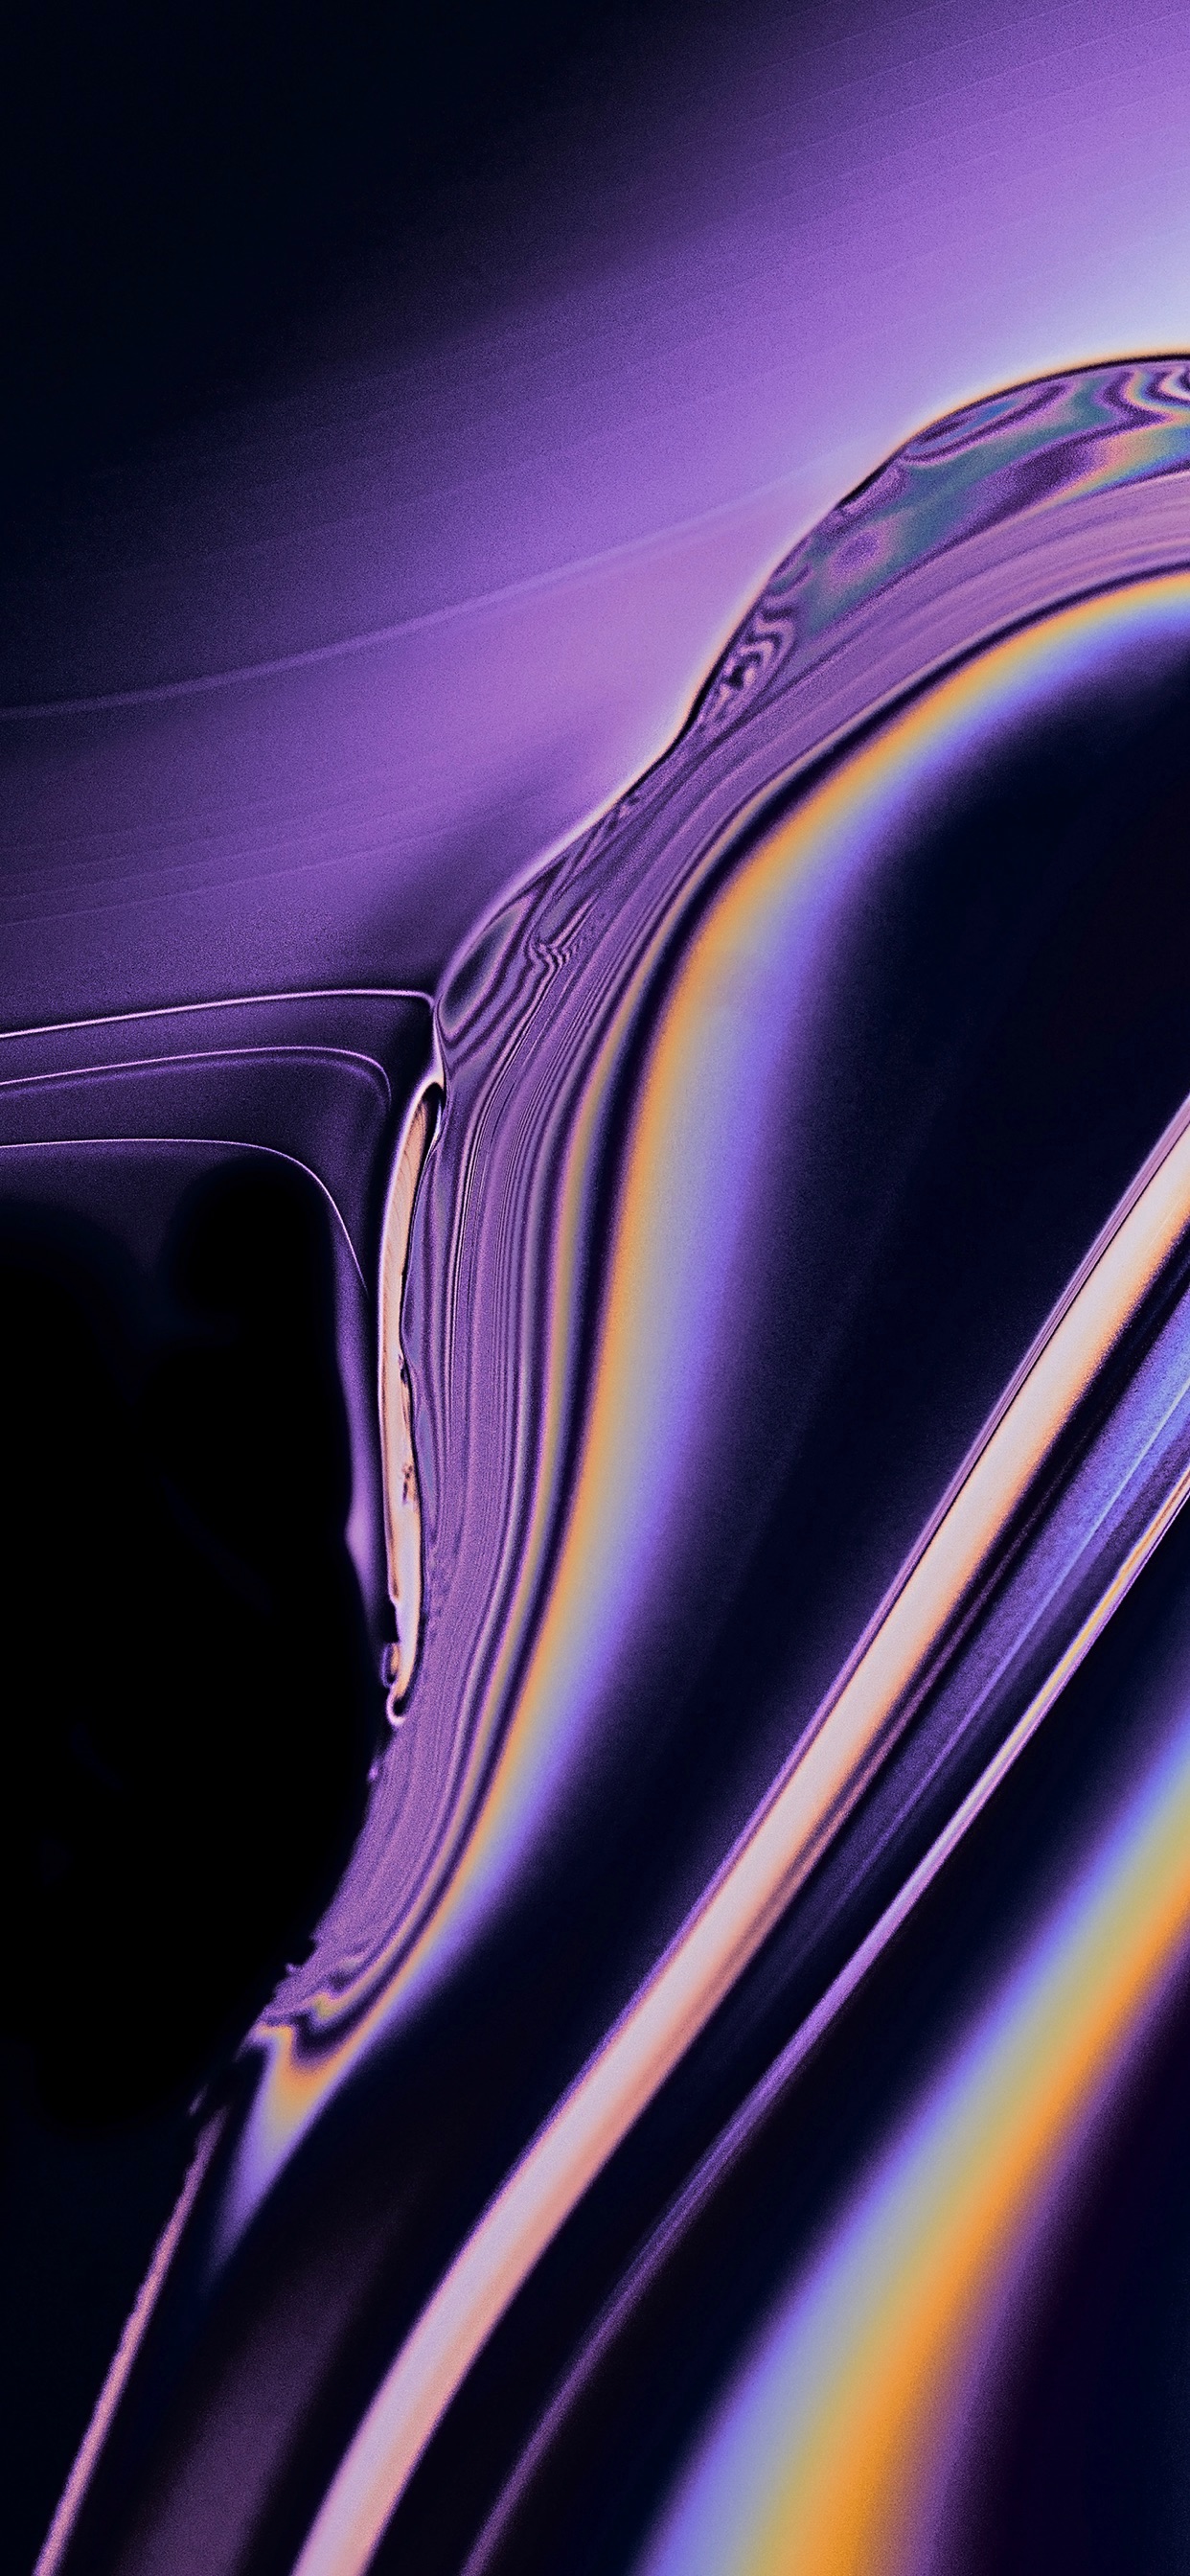 Wallpaper Weekends: Abstract iPhone Wallpapers From the ...